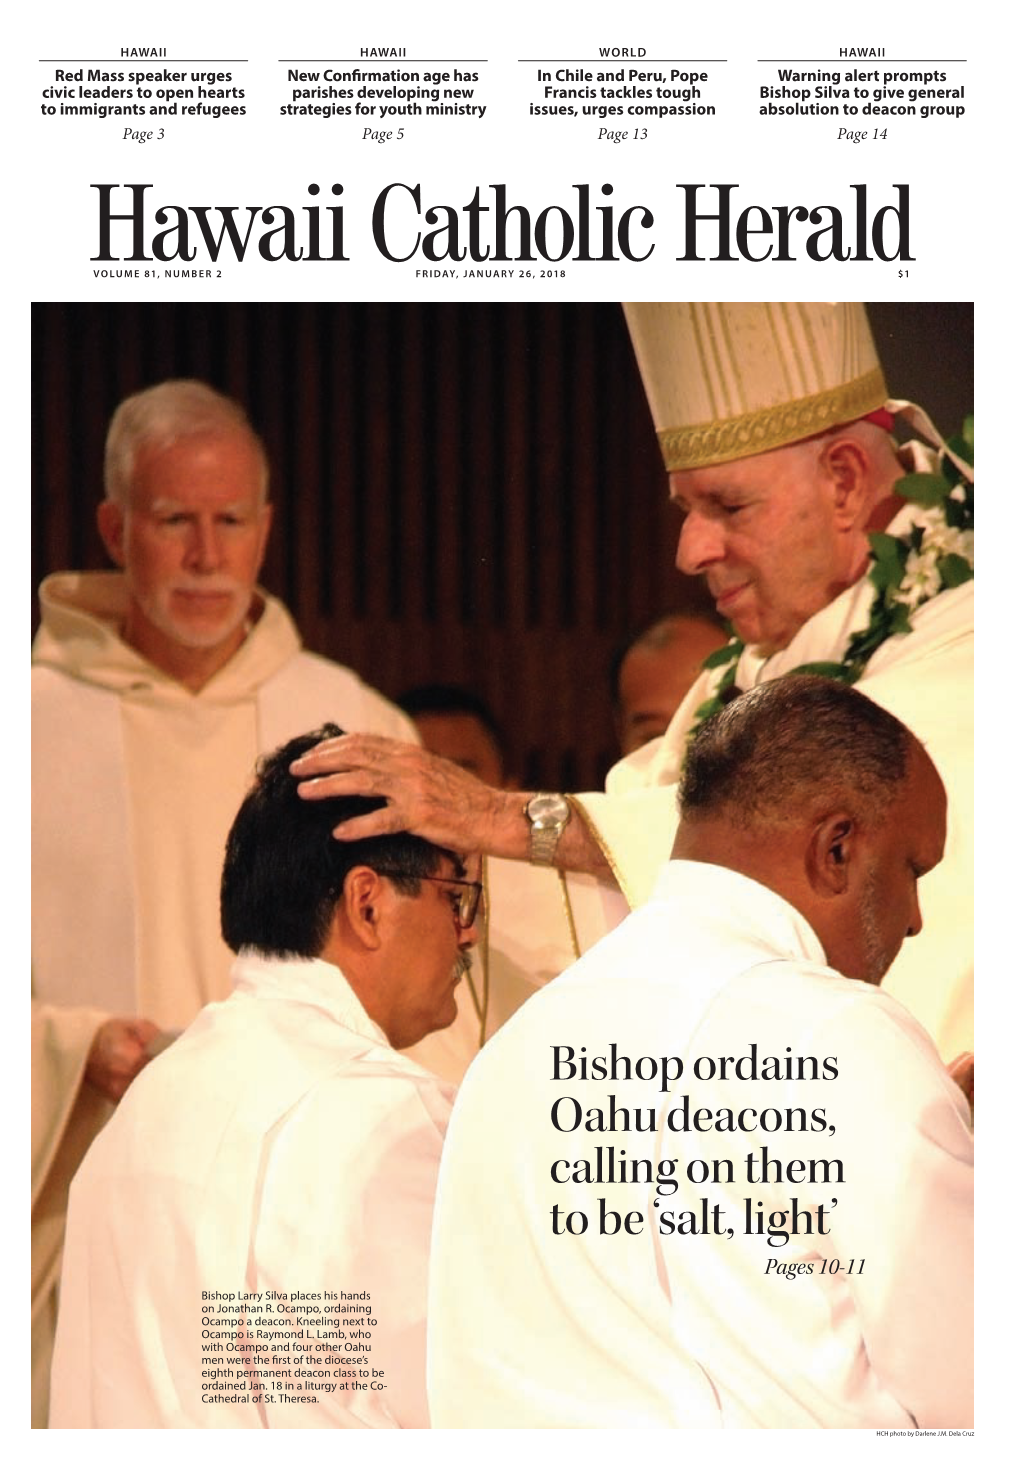 Bishop Ordains Oahu Deacons, Calling on Them to Be ‘Salt, Light’ Pages 10-11 Bishop Larry Silva Places His Hands on Jonathan R